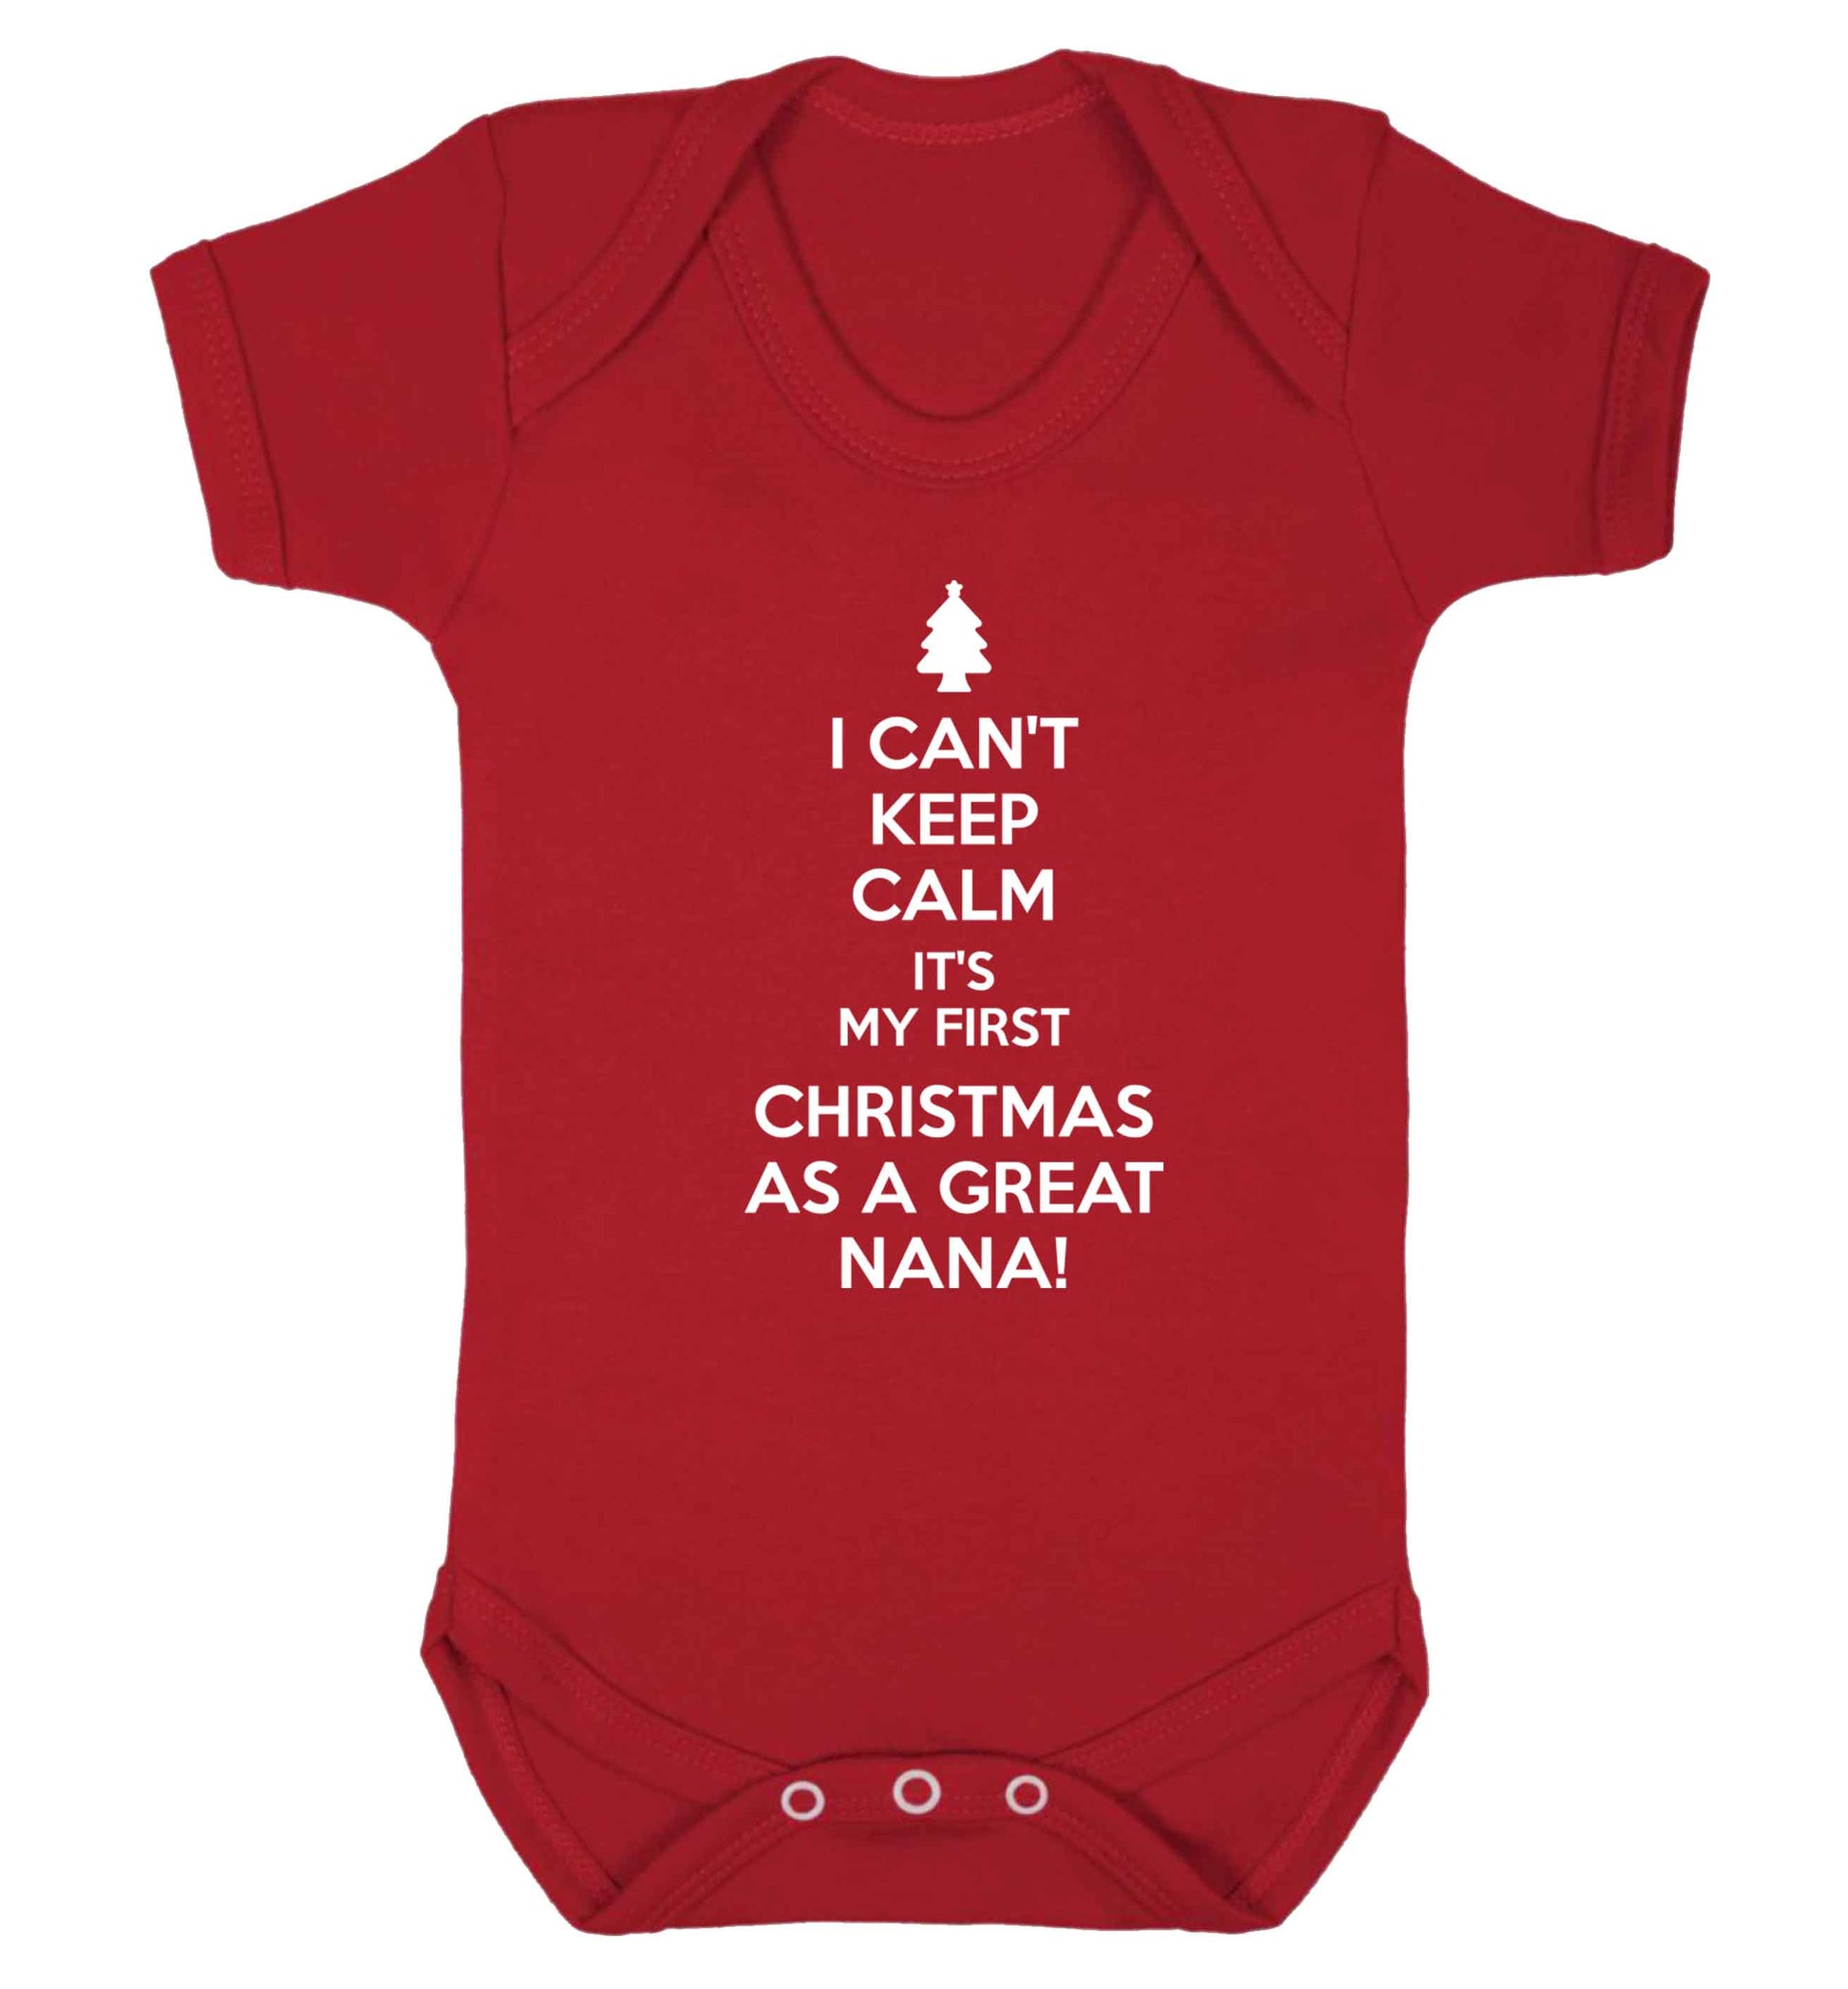 I can't keep calm it's my first Christmas as a great nana! Baby Vest red 18-24 months